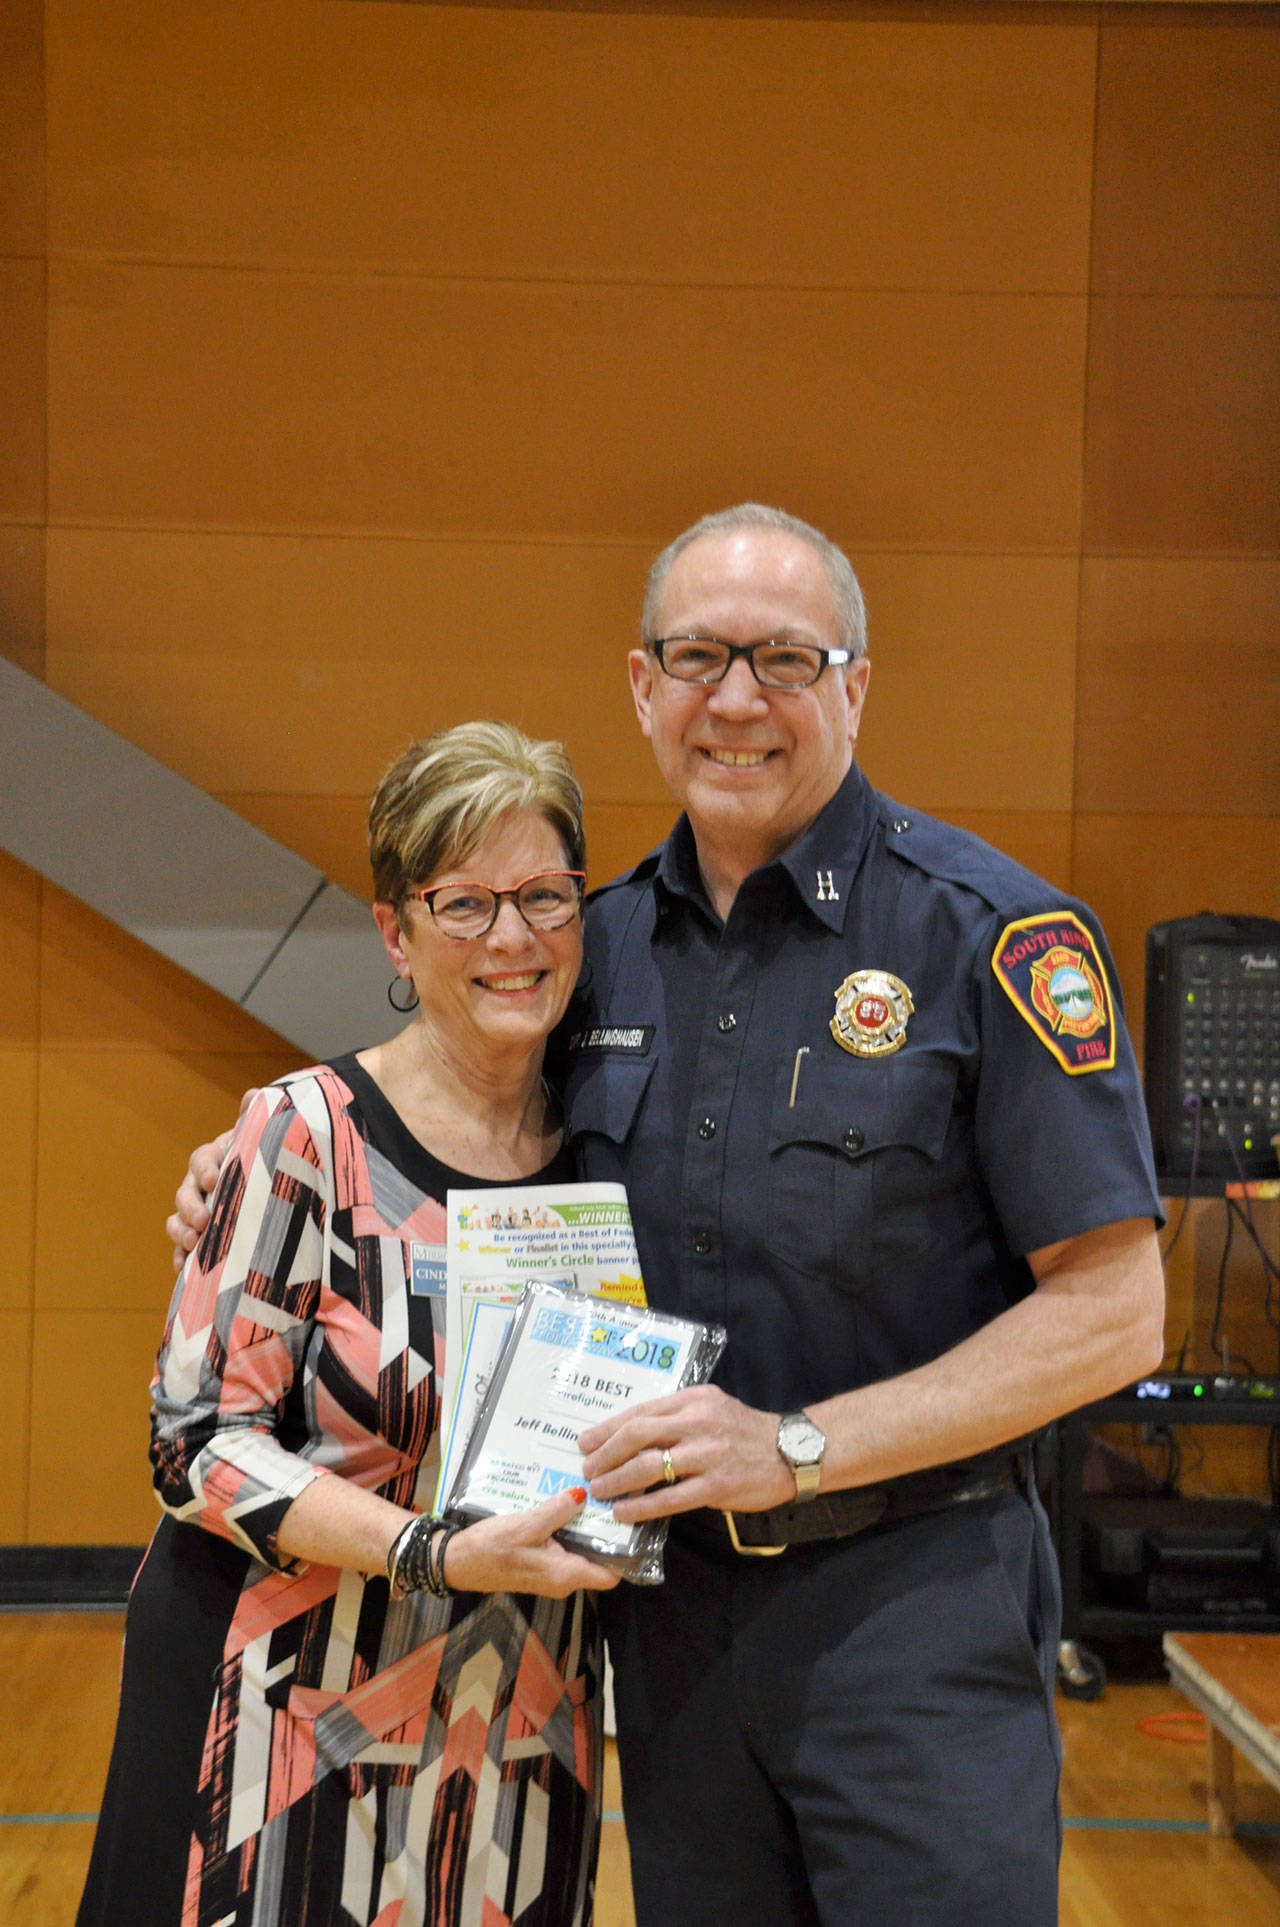 South King Fire & Rescue Capt. Jeff Bellinghausen, best firefighter winner, right, and Mirror sales consultant Cindy Ducich. Heidi Sanders, the Mirror